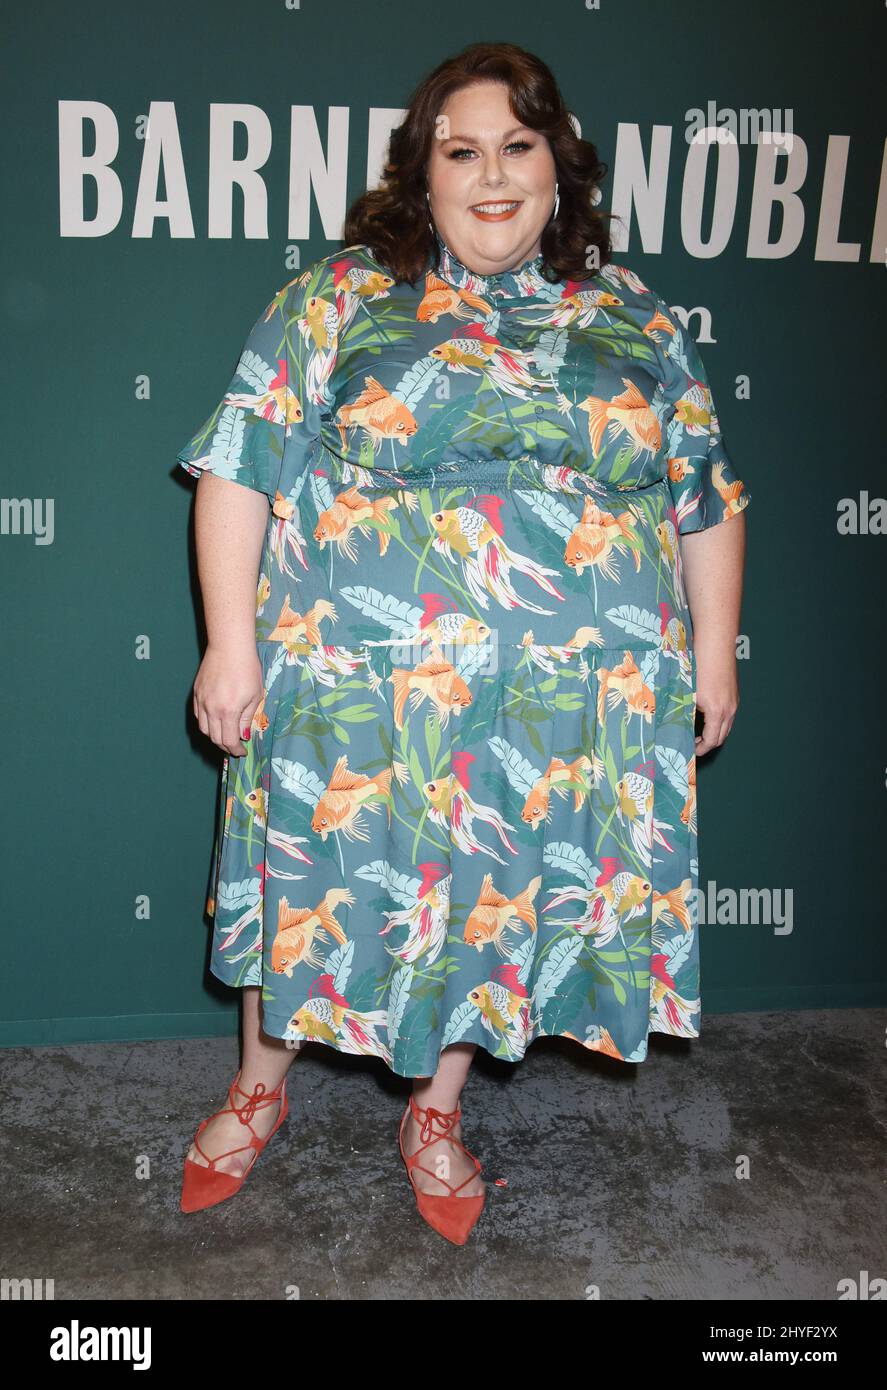 Chrissy Metz at the Chrissy Metz book signing for 'This Is Me' held at Barnes and Noble at The Grove on April 8, 2018 in Los Angeles Stock Photo